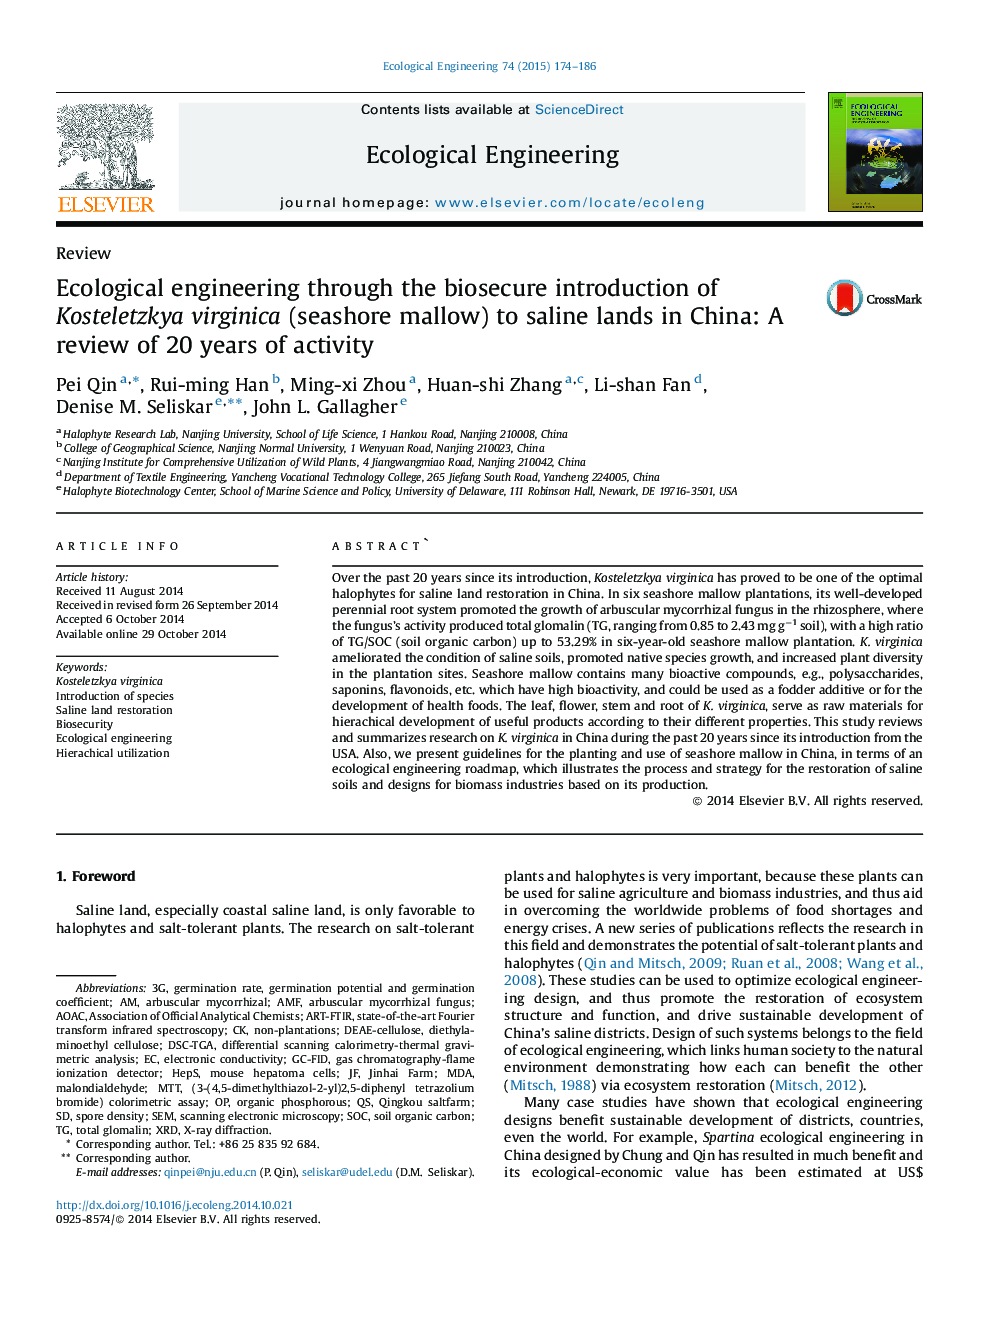 Ecological engineering through the biosecure introduction of Kosteletzkya virginica (seashore mallow) to saline lands in China: A review of 20 years of activity